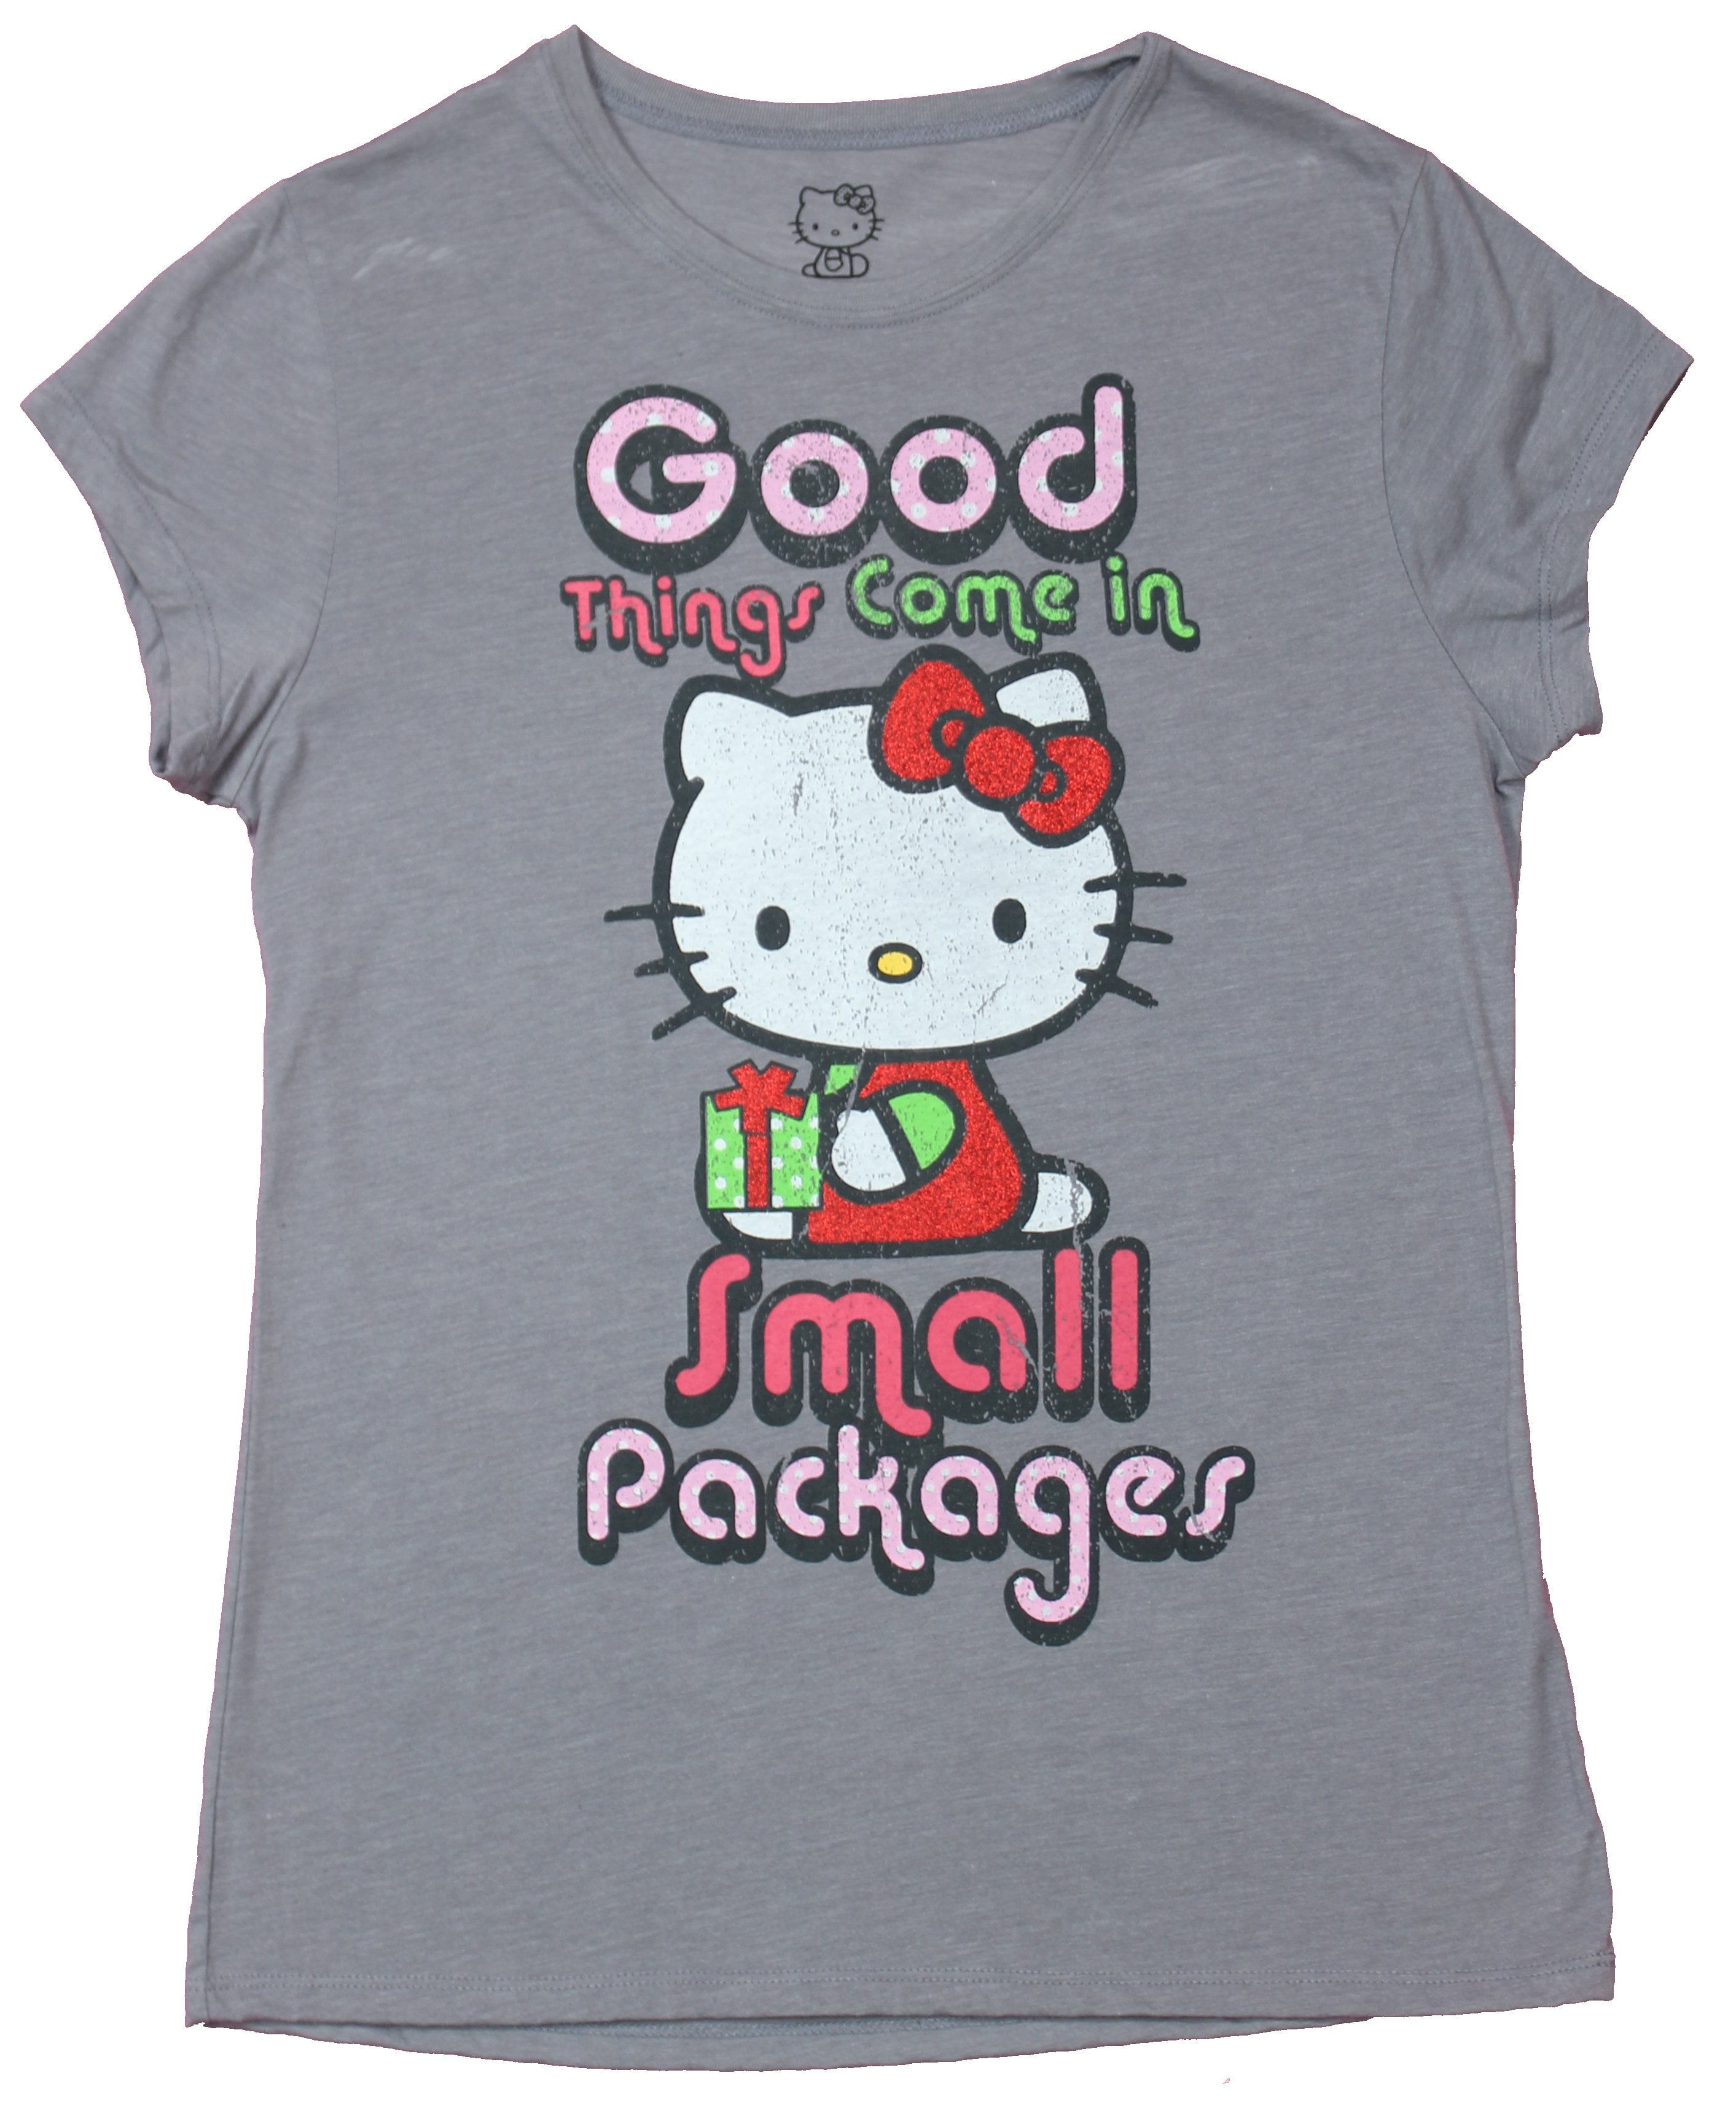 Unisex size hello kitty shirt. Hello Kitty T-shirt for women and teenager